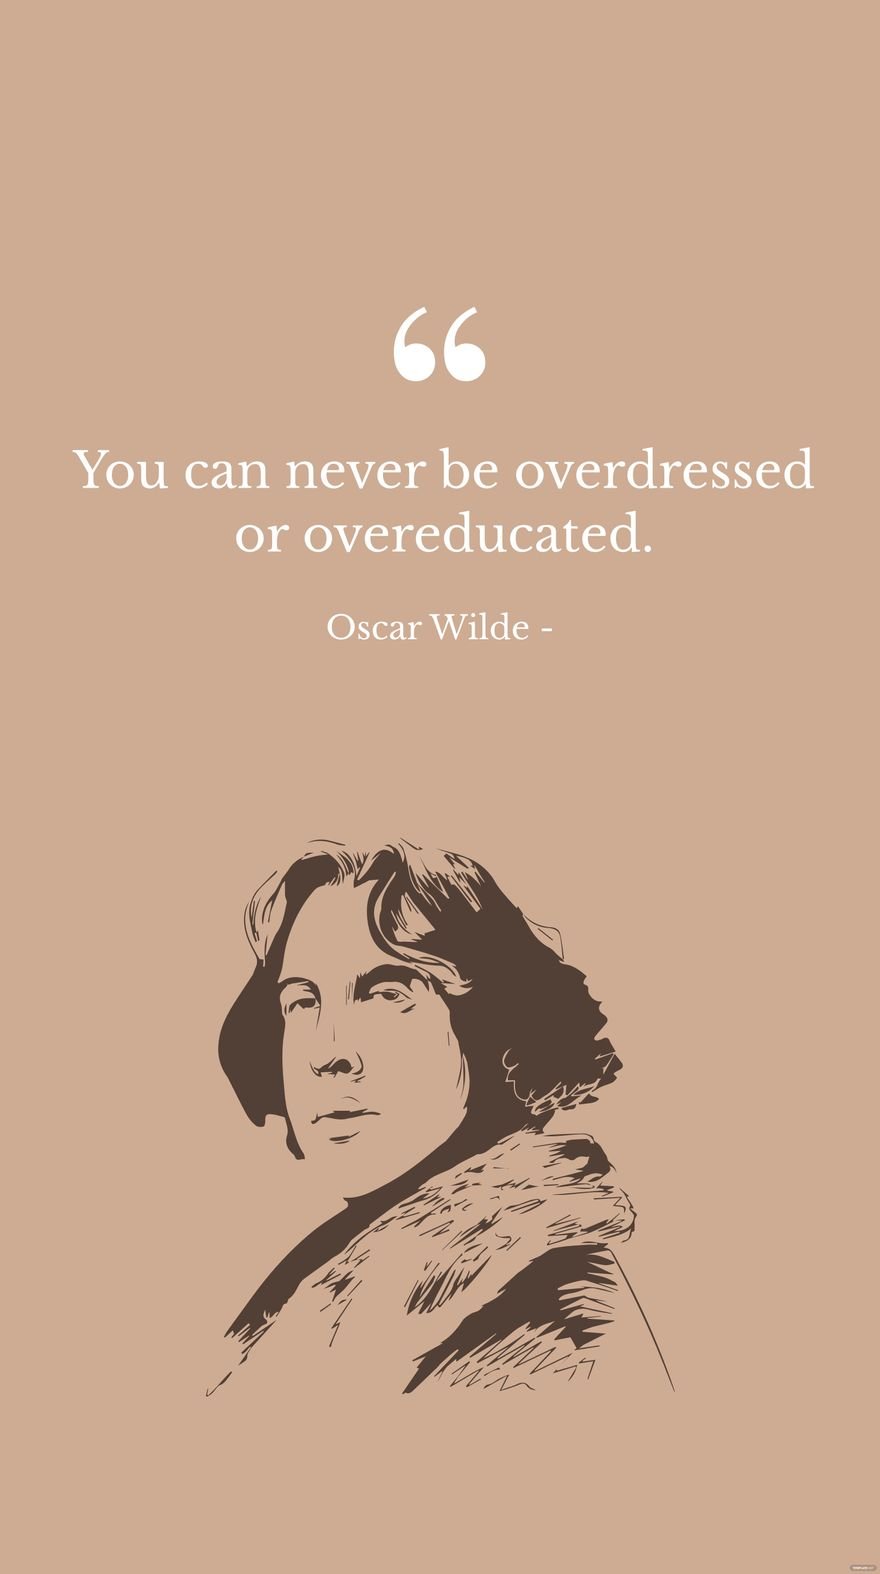 Oscar Wilde - You can never be overdressed or overeducated.